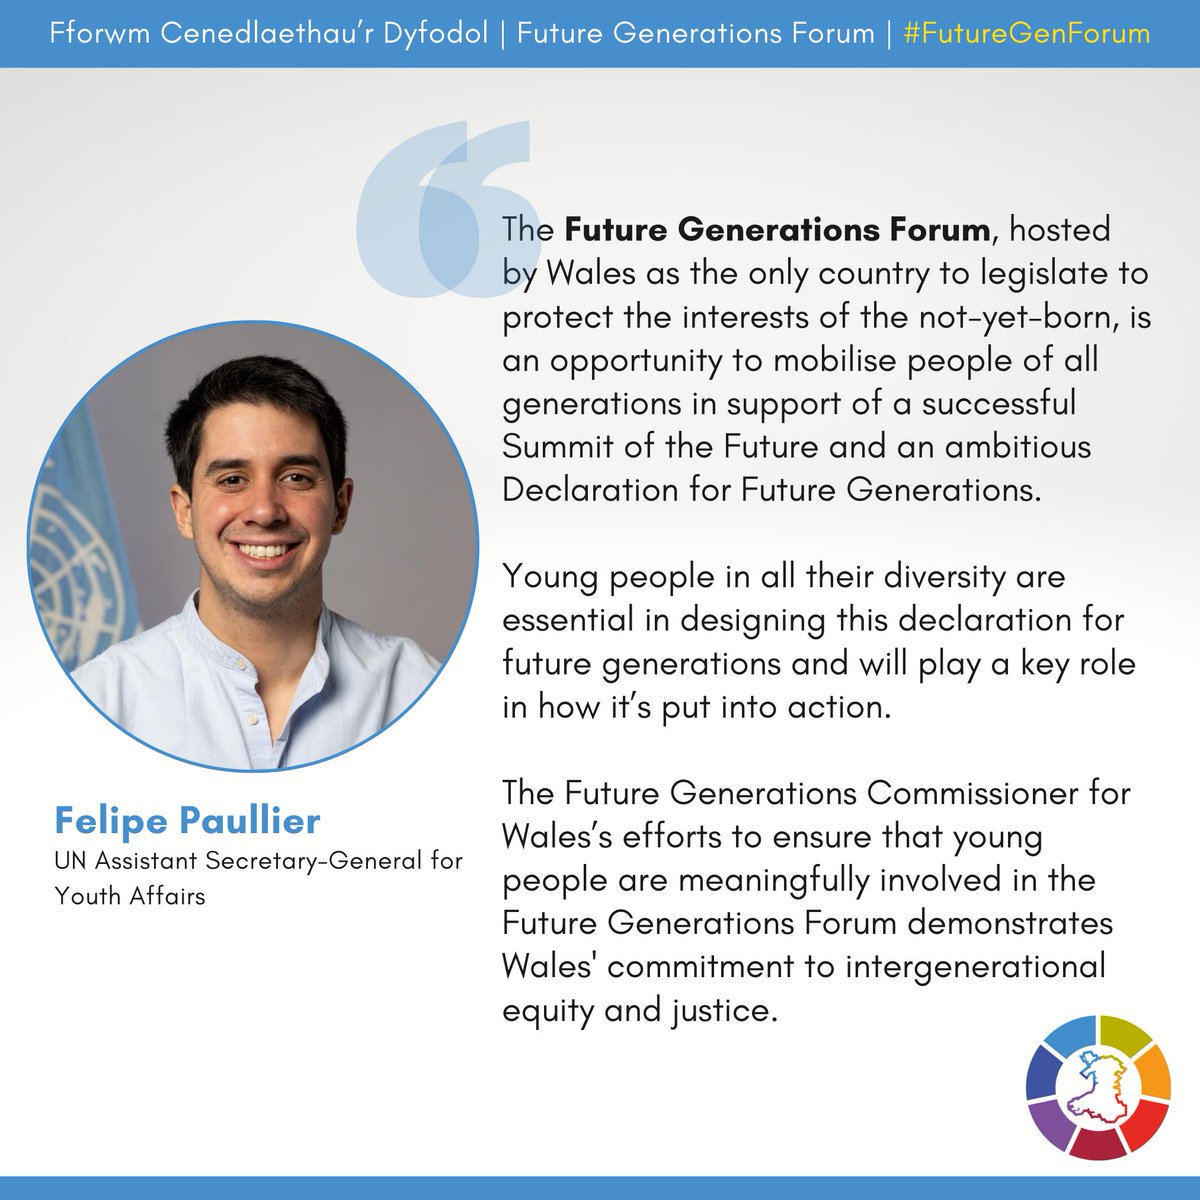 'The Future Generations Forum, hosted by Wales as the only country to legislate to protect the interests of the not-yet-born, is an opportunity to mobilise people of all generations...' - @felipepaullier See you at #FutureGenForum today! #CymruCan